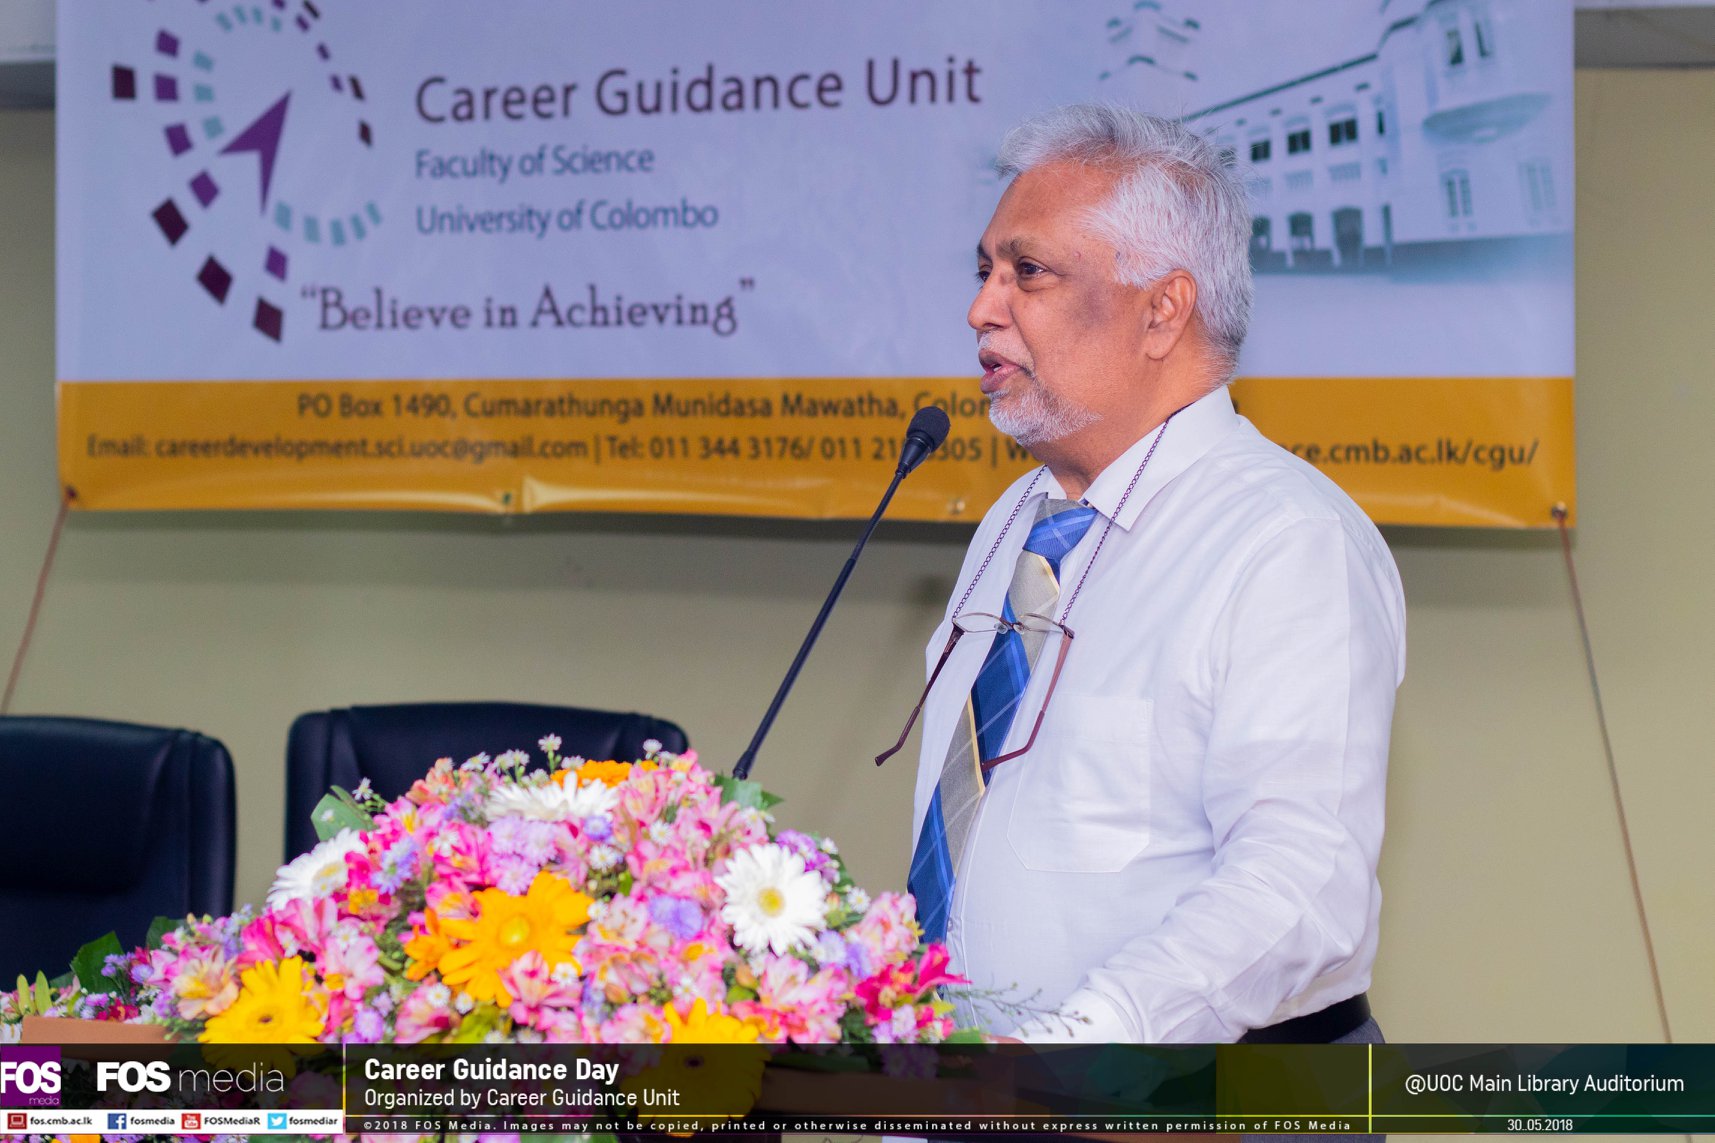 The Career Guidance Day